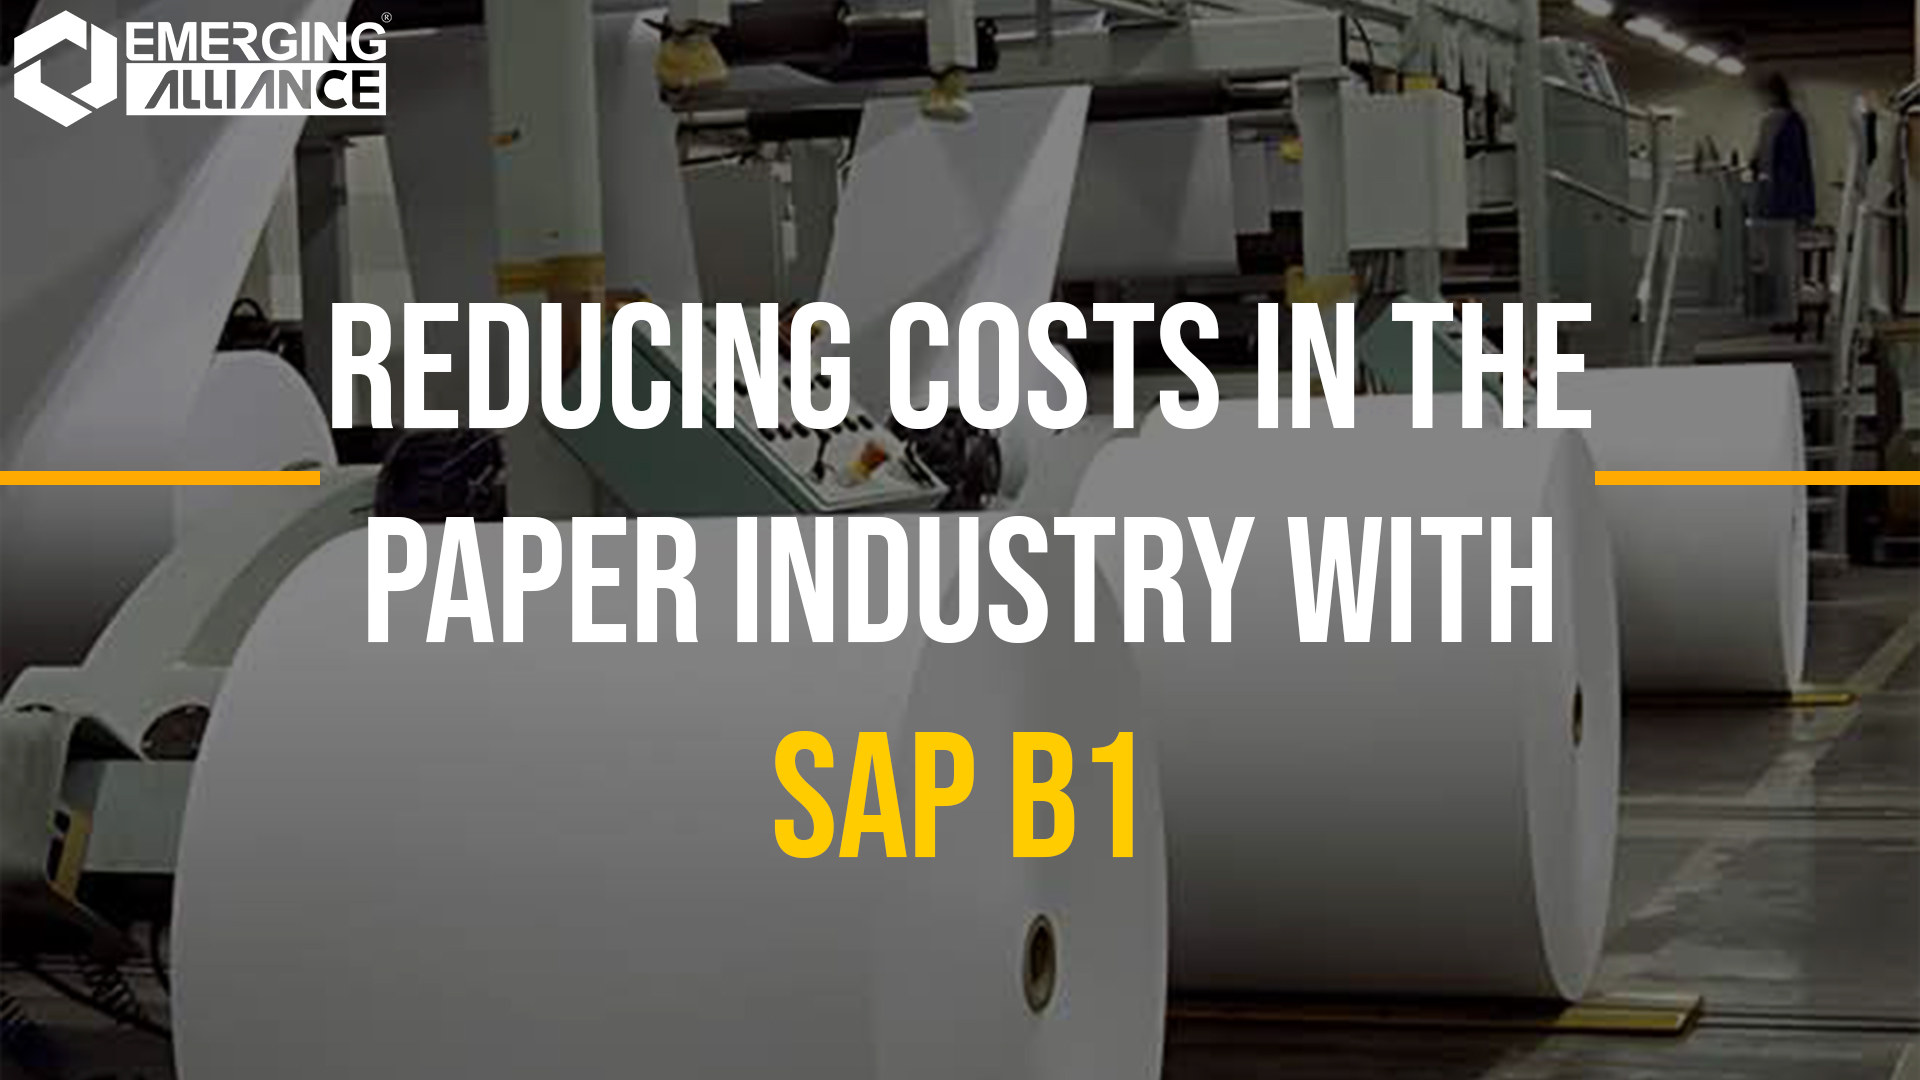 SAP B1 (SAP Business One) for Paper Industry